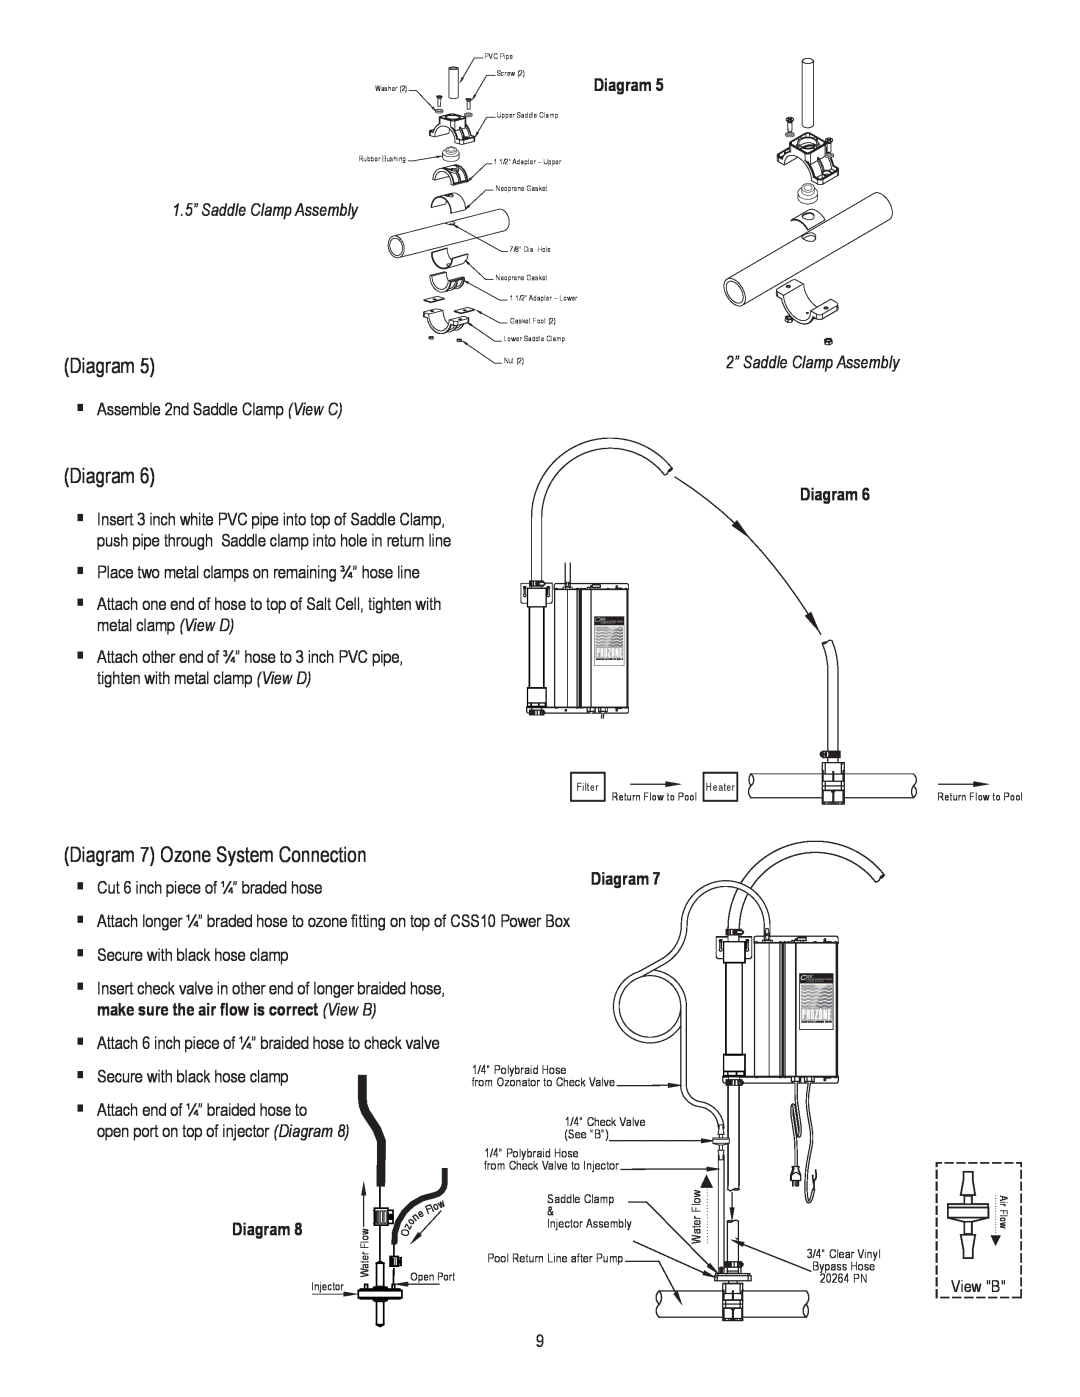 Prozone Pool Products CSS10 Diagram 7 Ozone System Connection, ·metal clamp View D, Secure with black hose clamp 